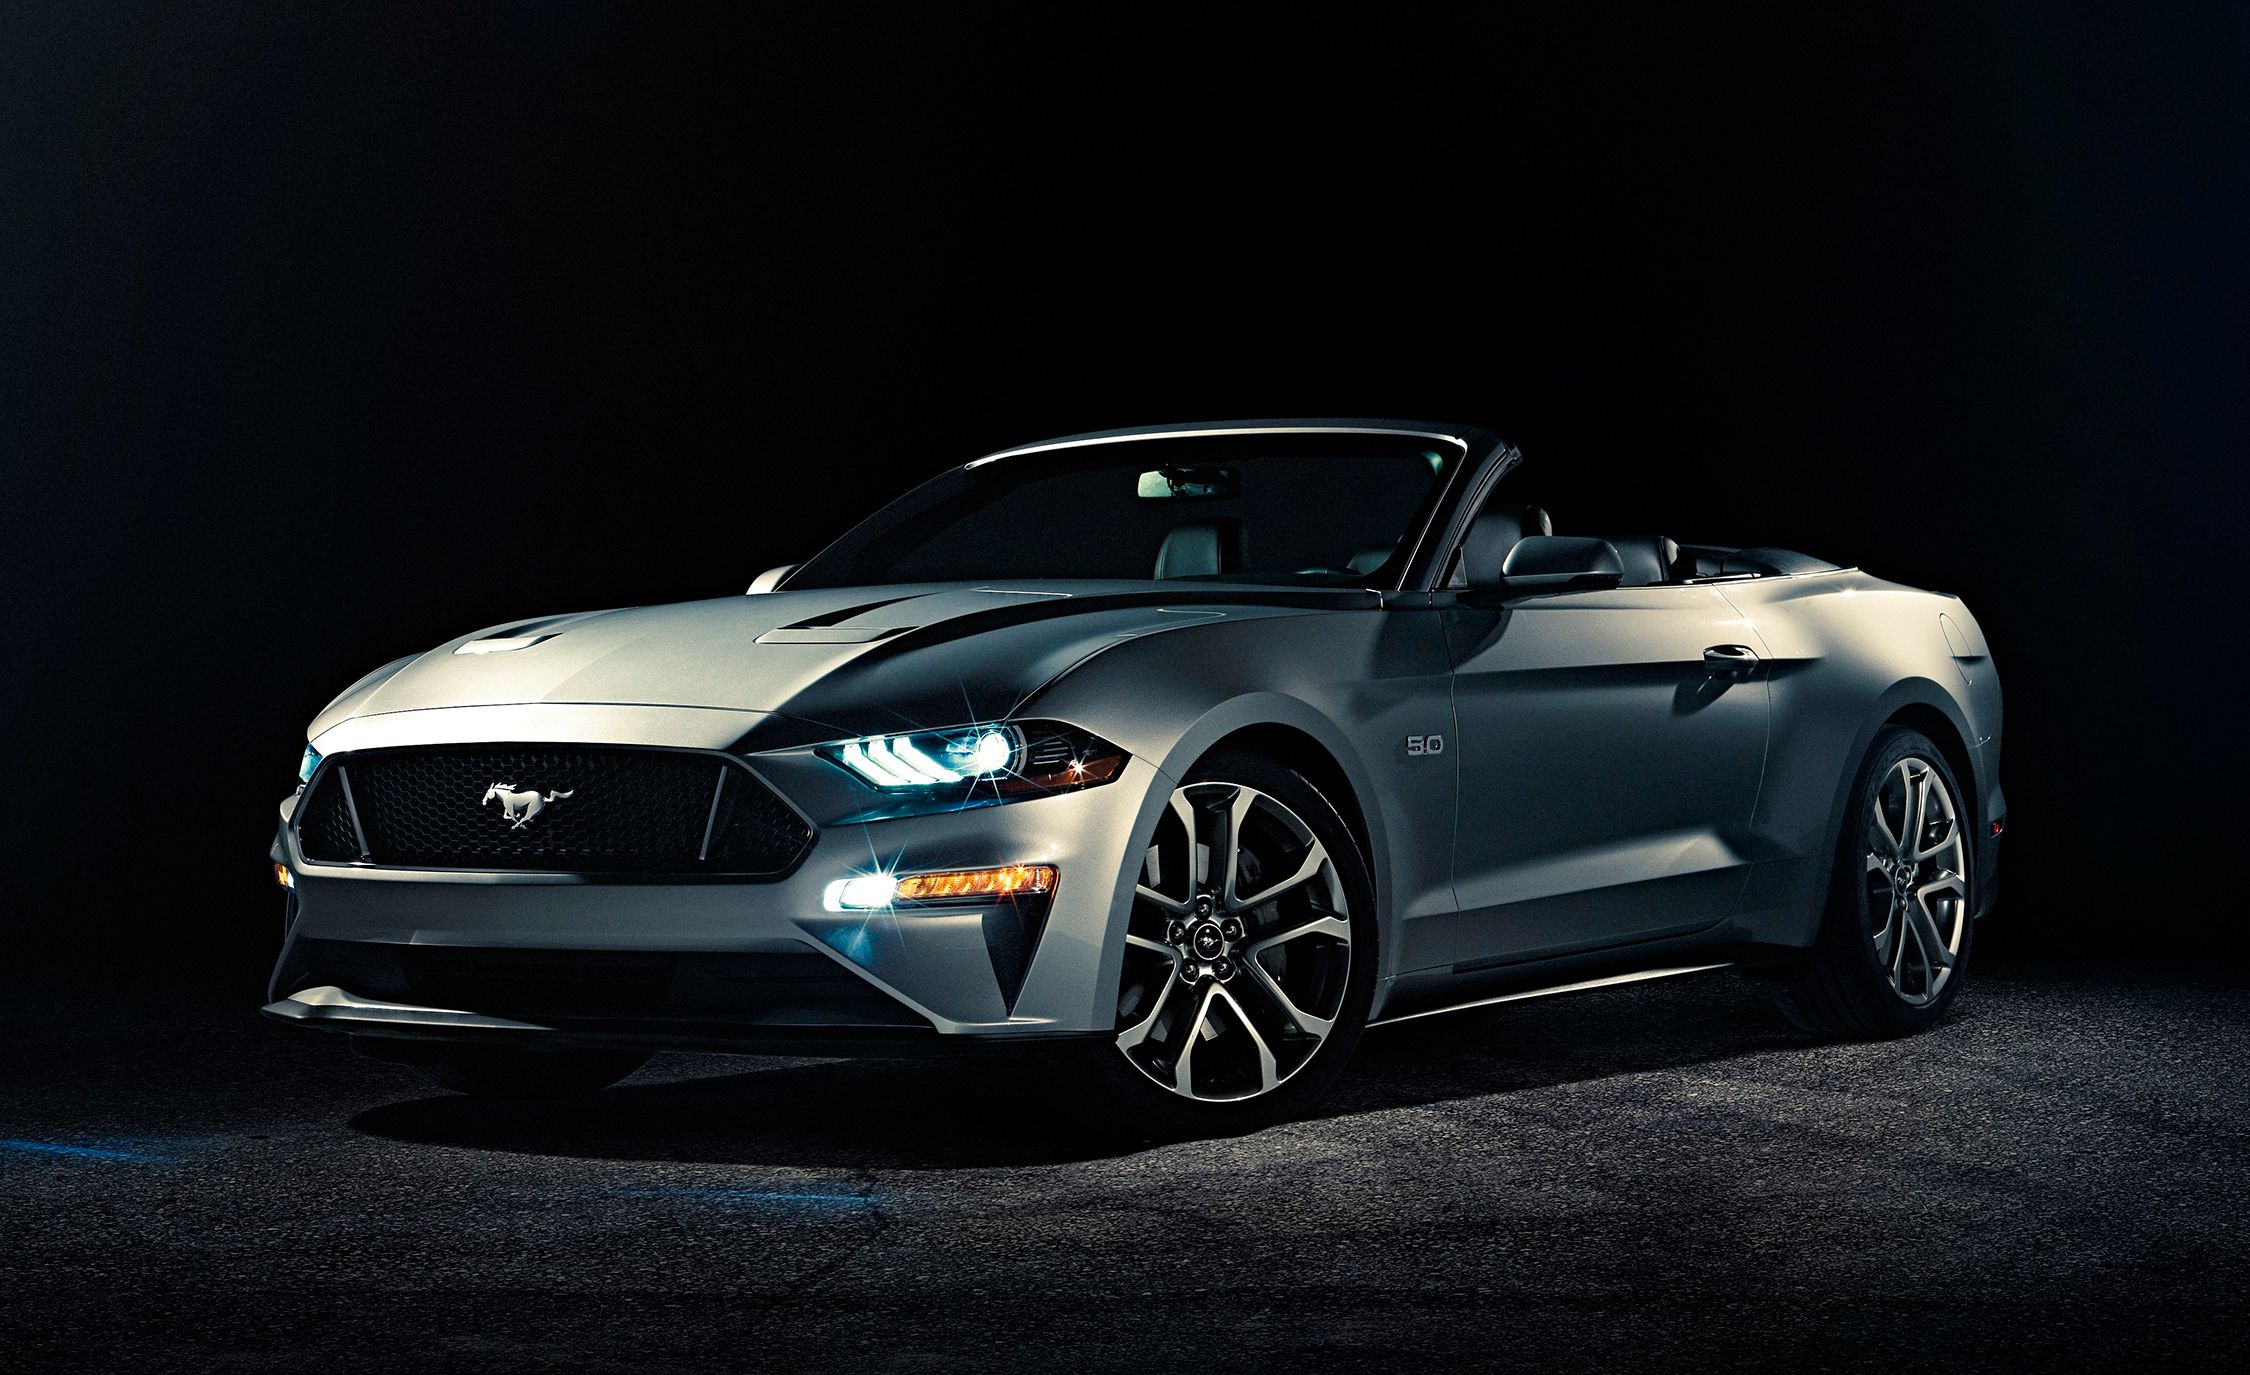 2015 Ford Mustang convertible backs good looks with power economy